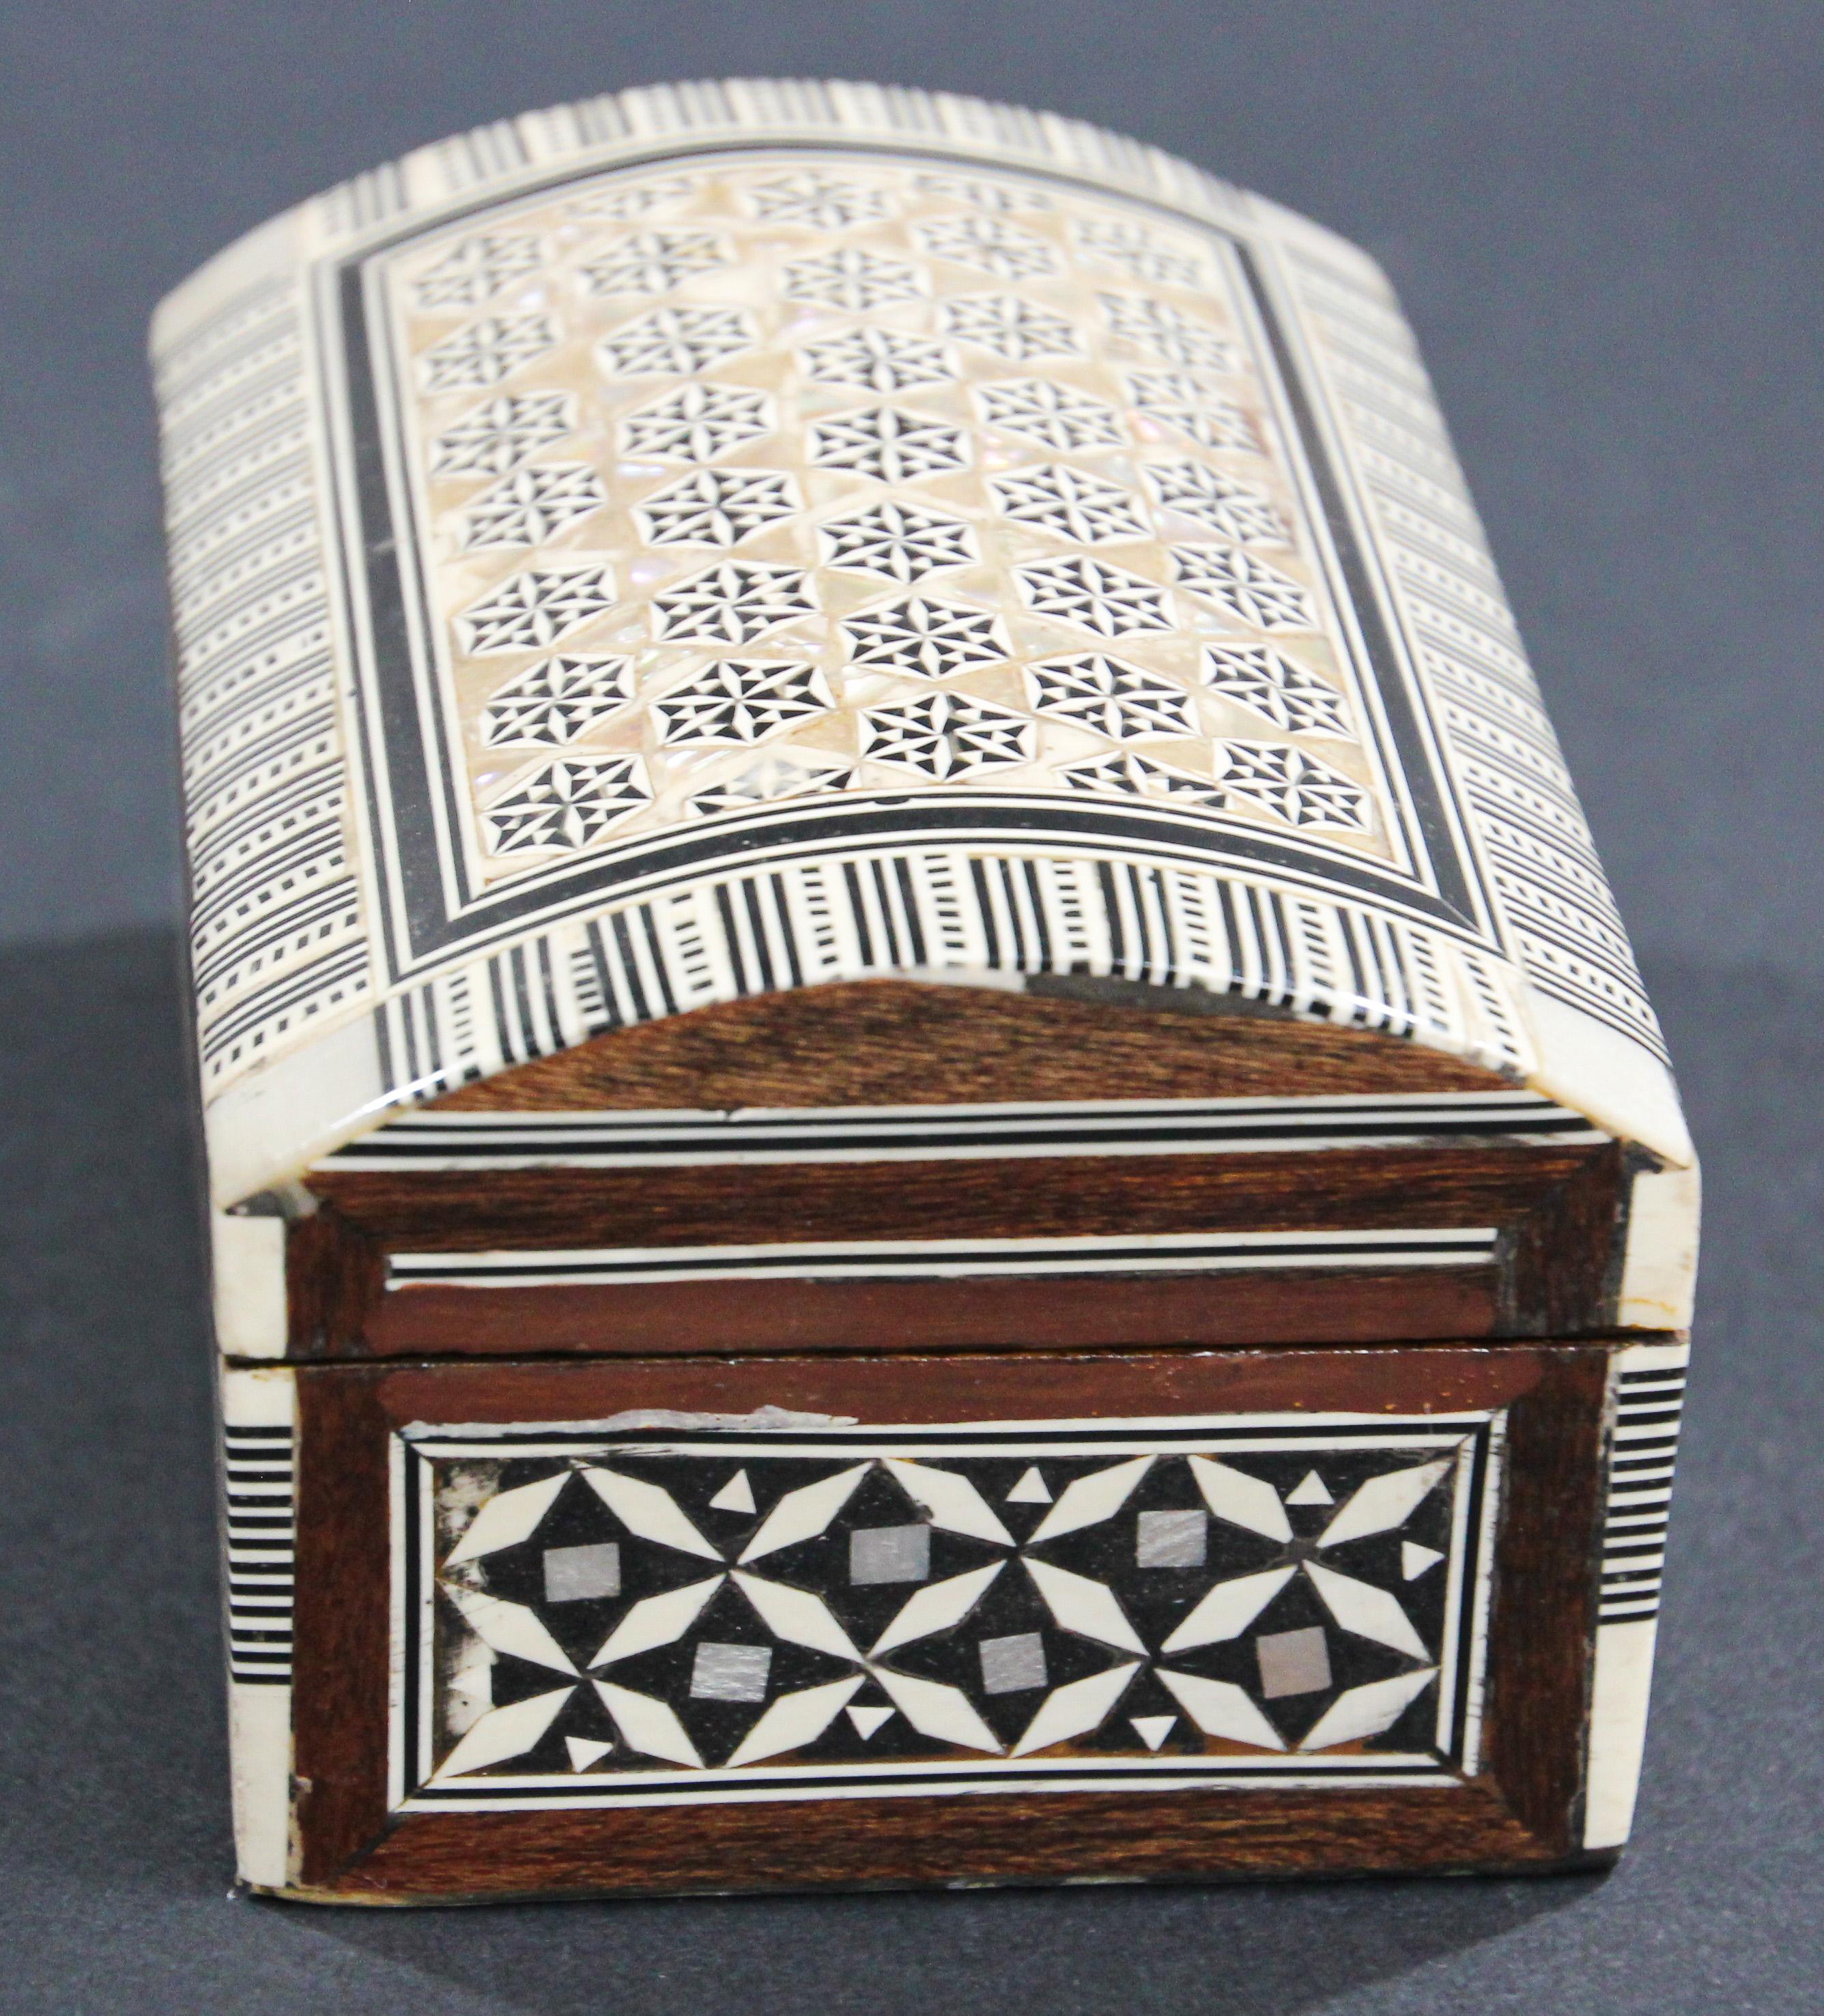 Middle Eastern Moorish Handcrafted Mosaic Decorative Box For Sale 2